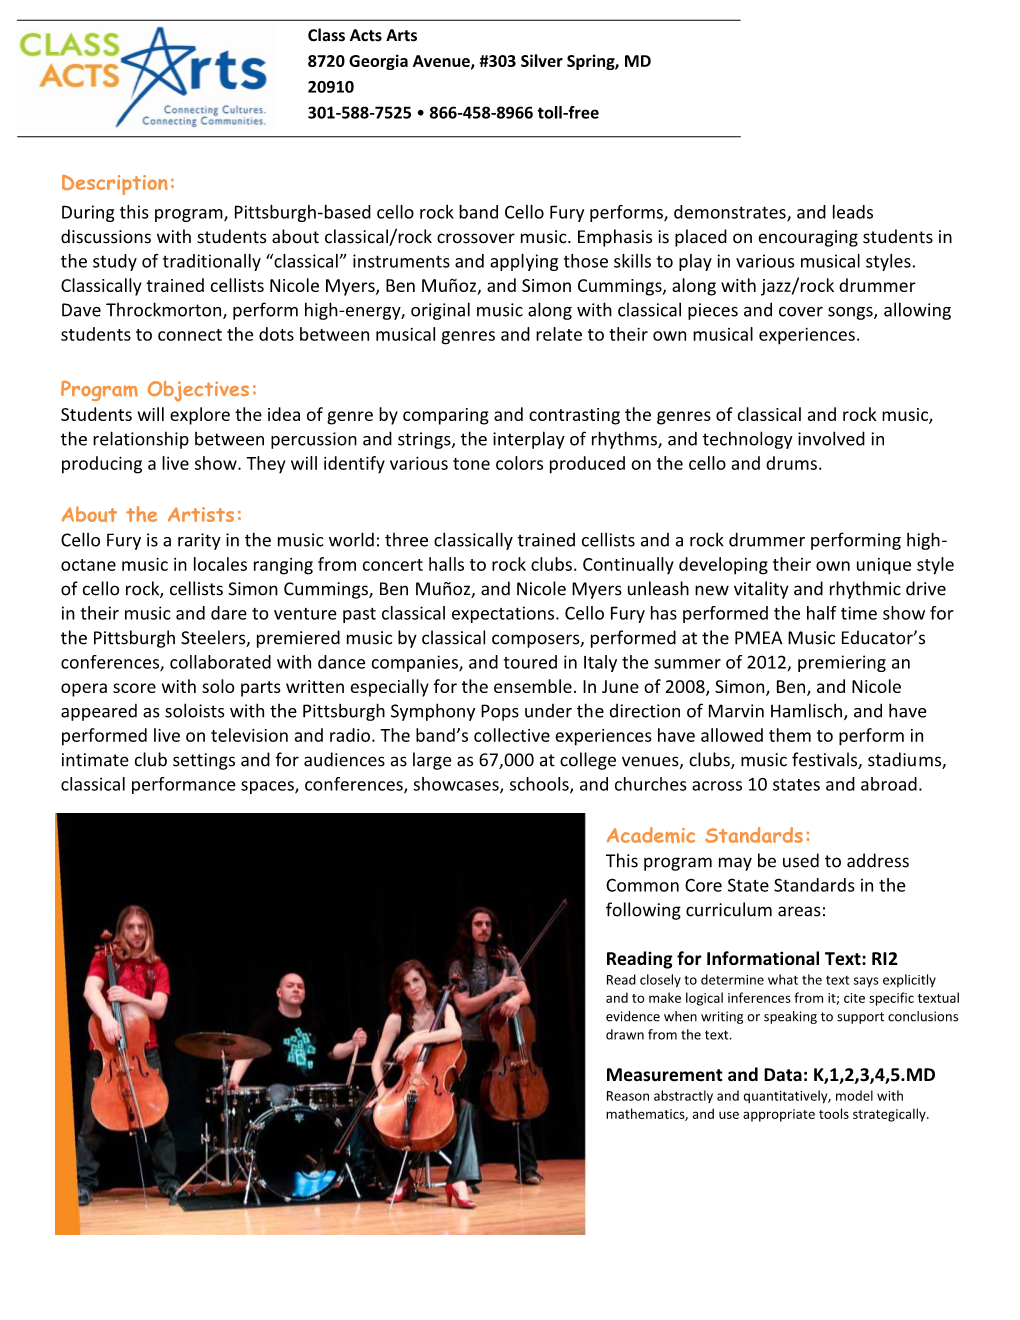 Description: During This Program, Pittsburgh-Based Cello Rock Band